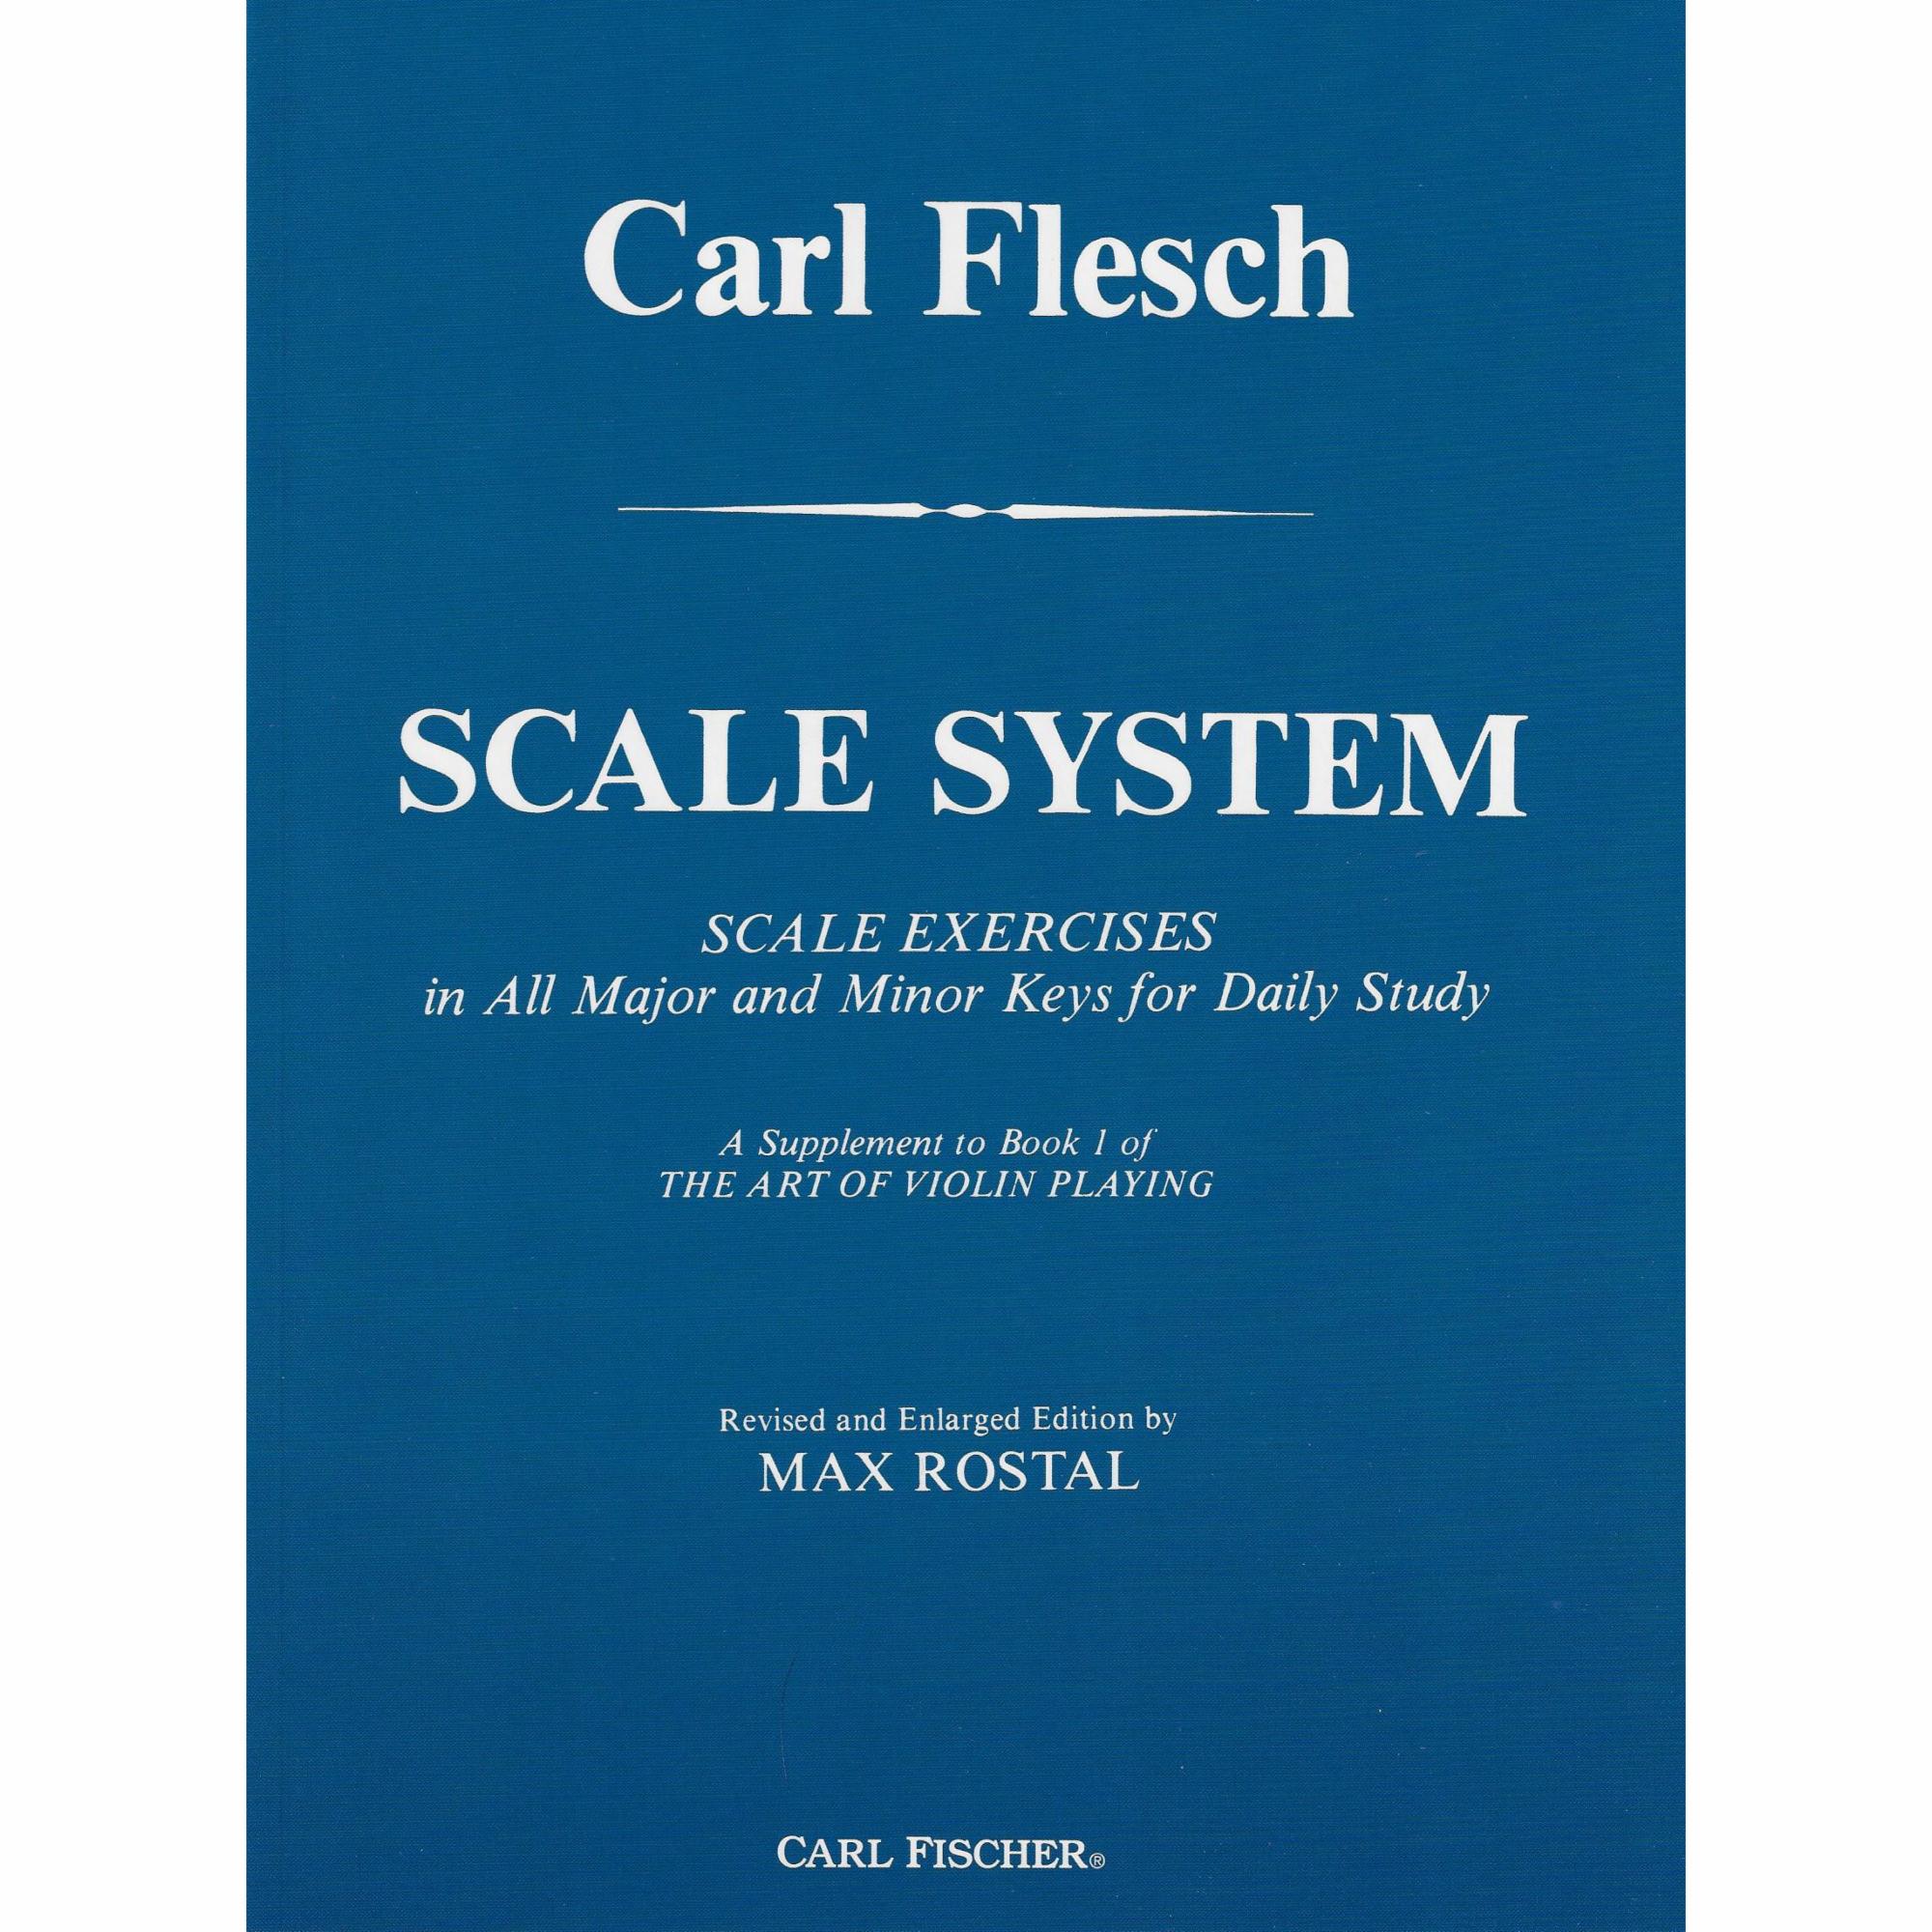 Flesch -- Scale System for Violin